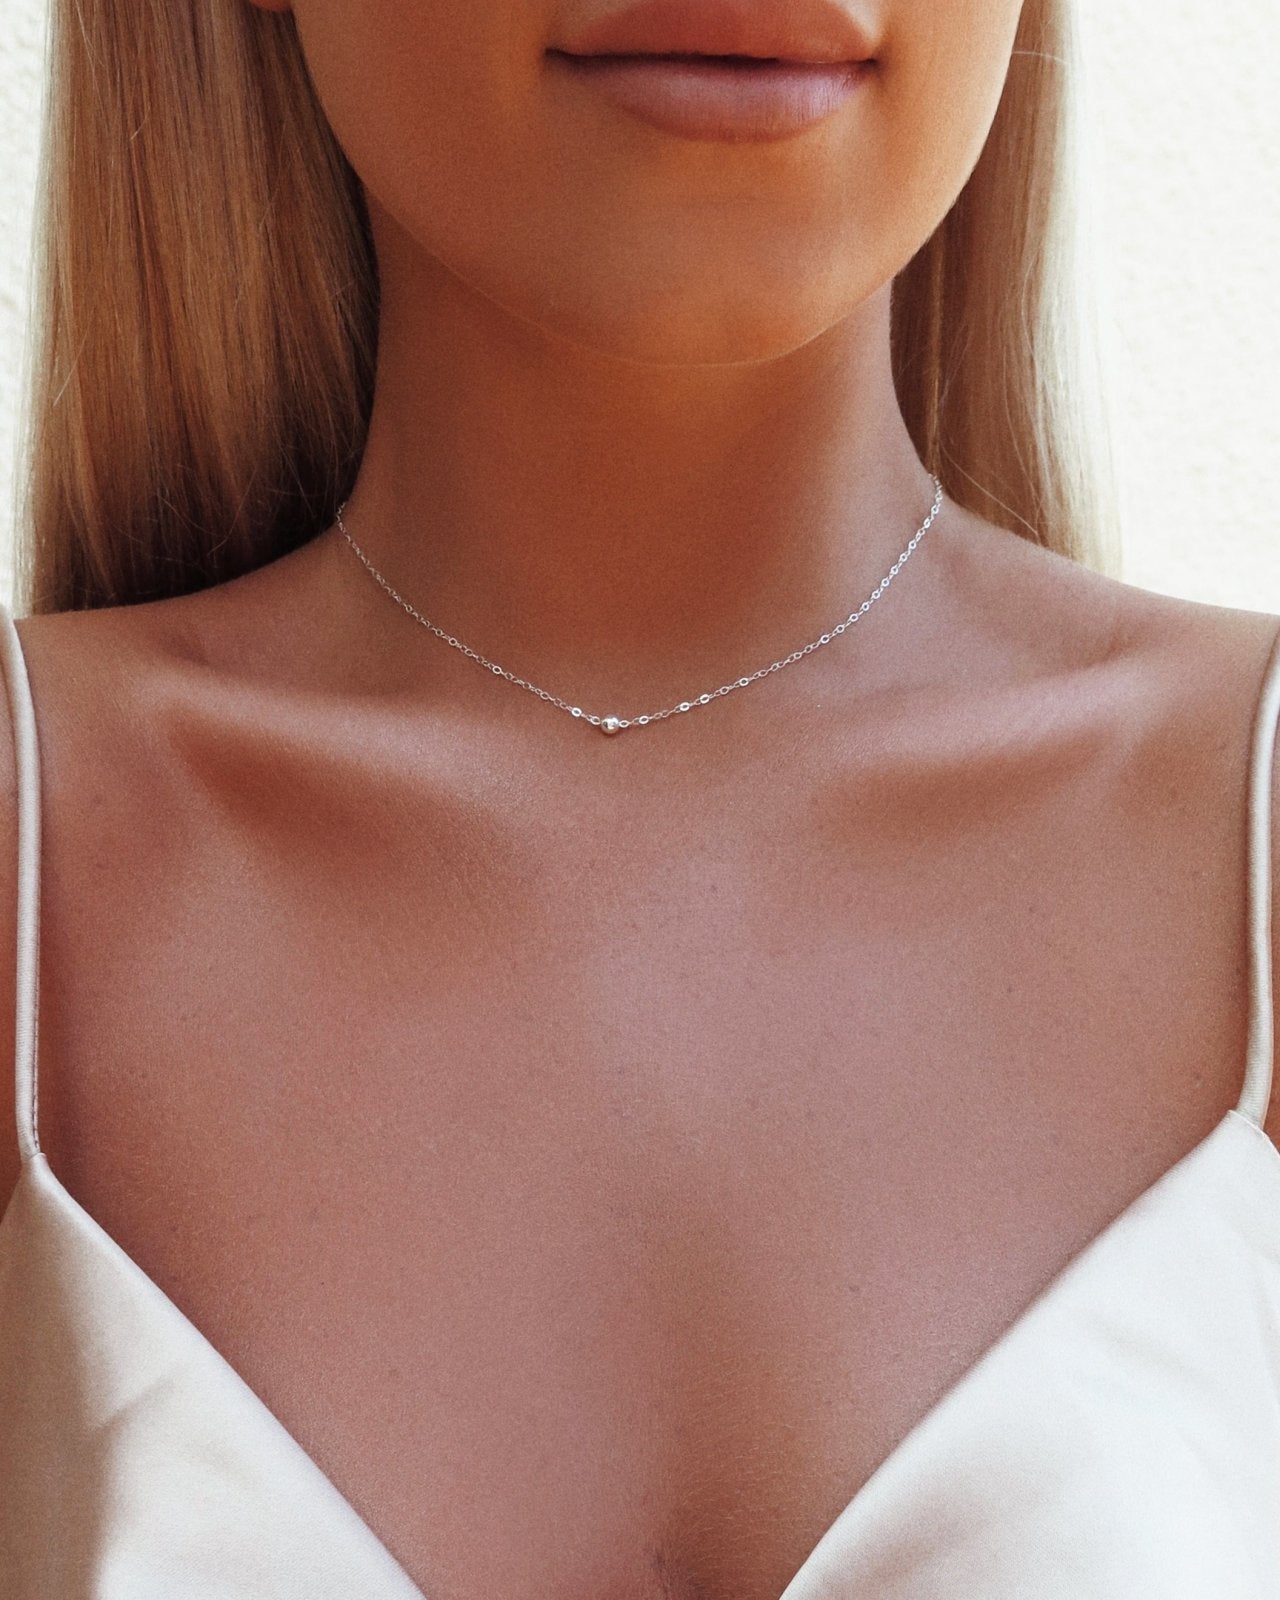 CLASSIC NECKLACE- Sterling Silver - The Littl - Classic Chain - 37cm (choker)